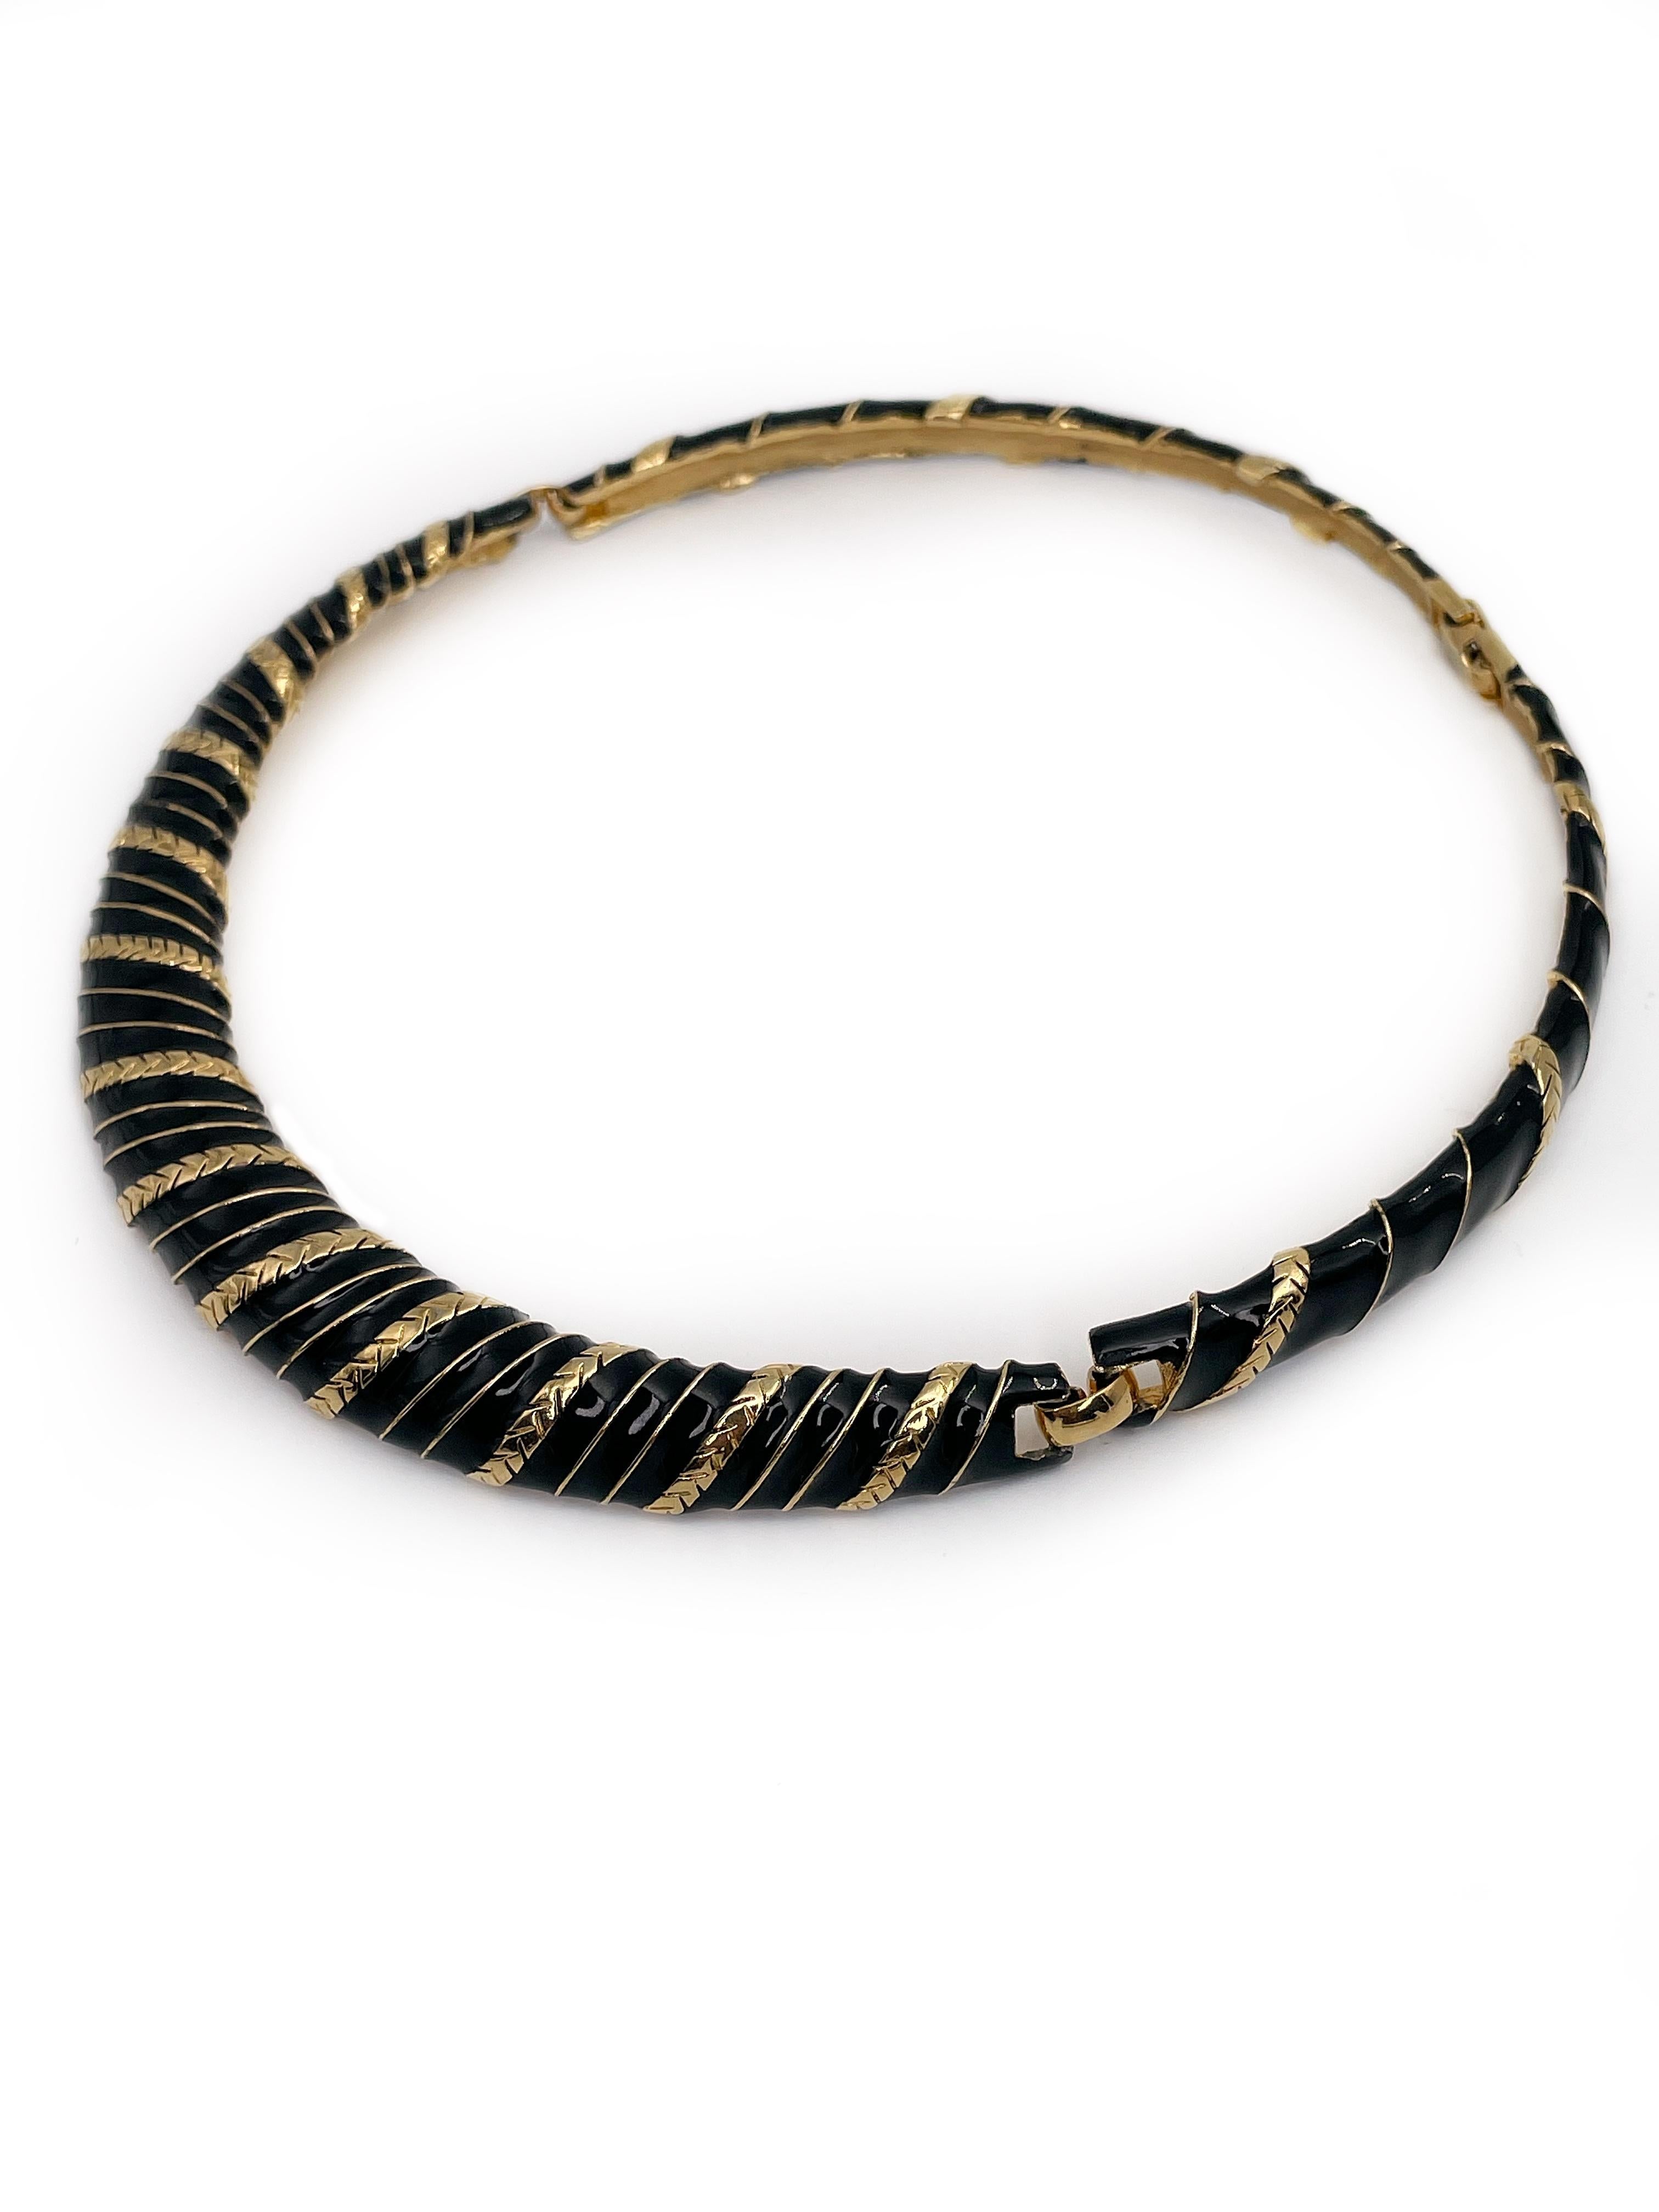 This is a minimalistic design collier necklace designed by YSL. This piece is gold plated, adorned with black enamel and diagonal stripes. 

It is made in 1970’s.

Markings: “YSL” (shown in photos).

Whole length: 37cm
Width: 1.3cm (max.), 0.5cm